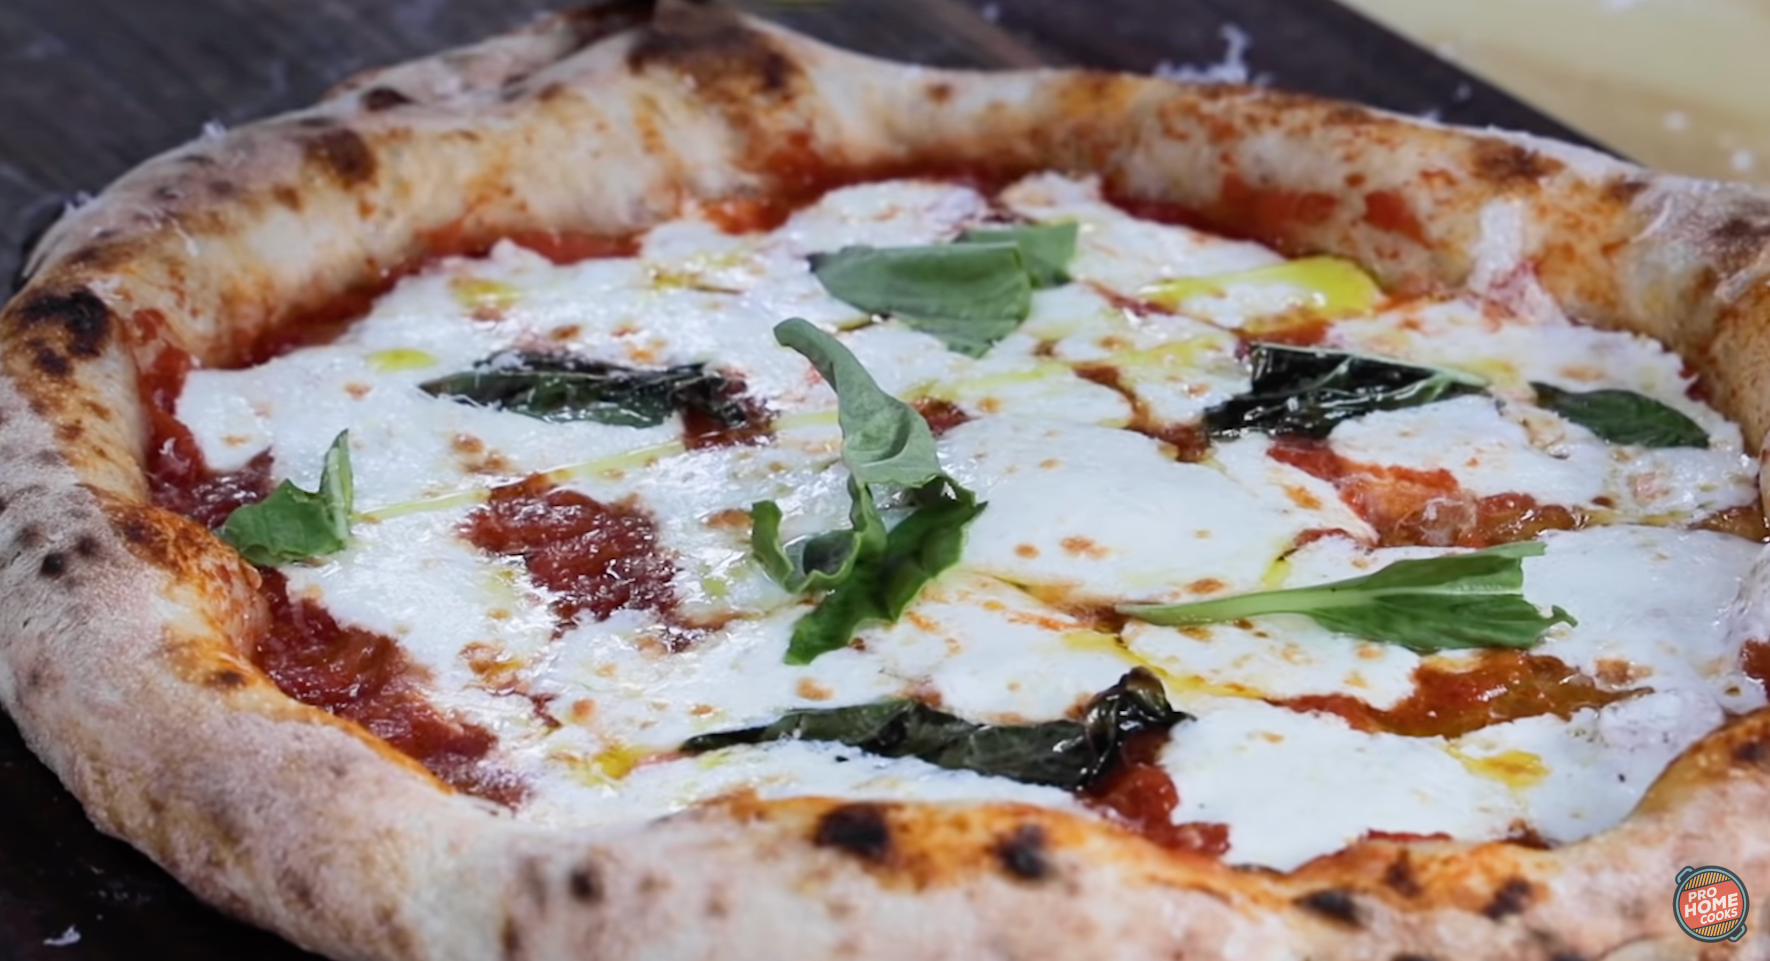 Pro Home Cooks | A Master Class in Neapolitan Pizza Making (Full